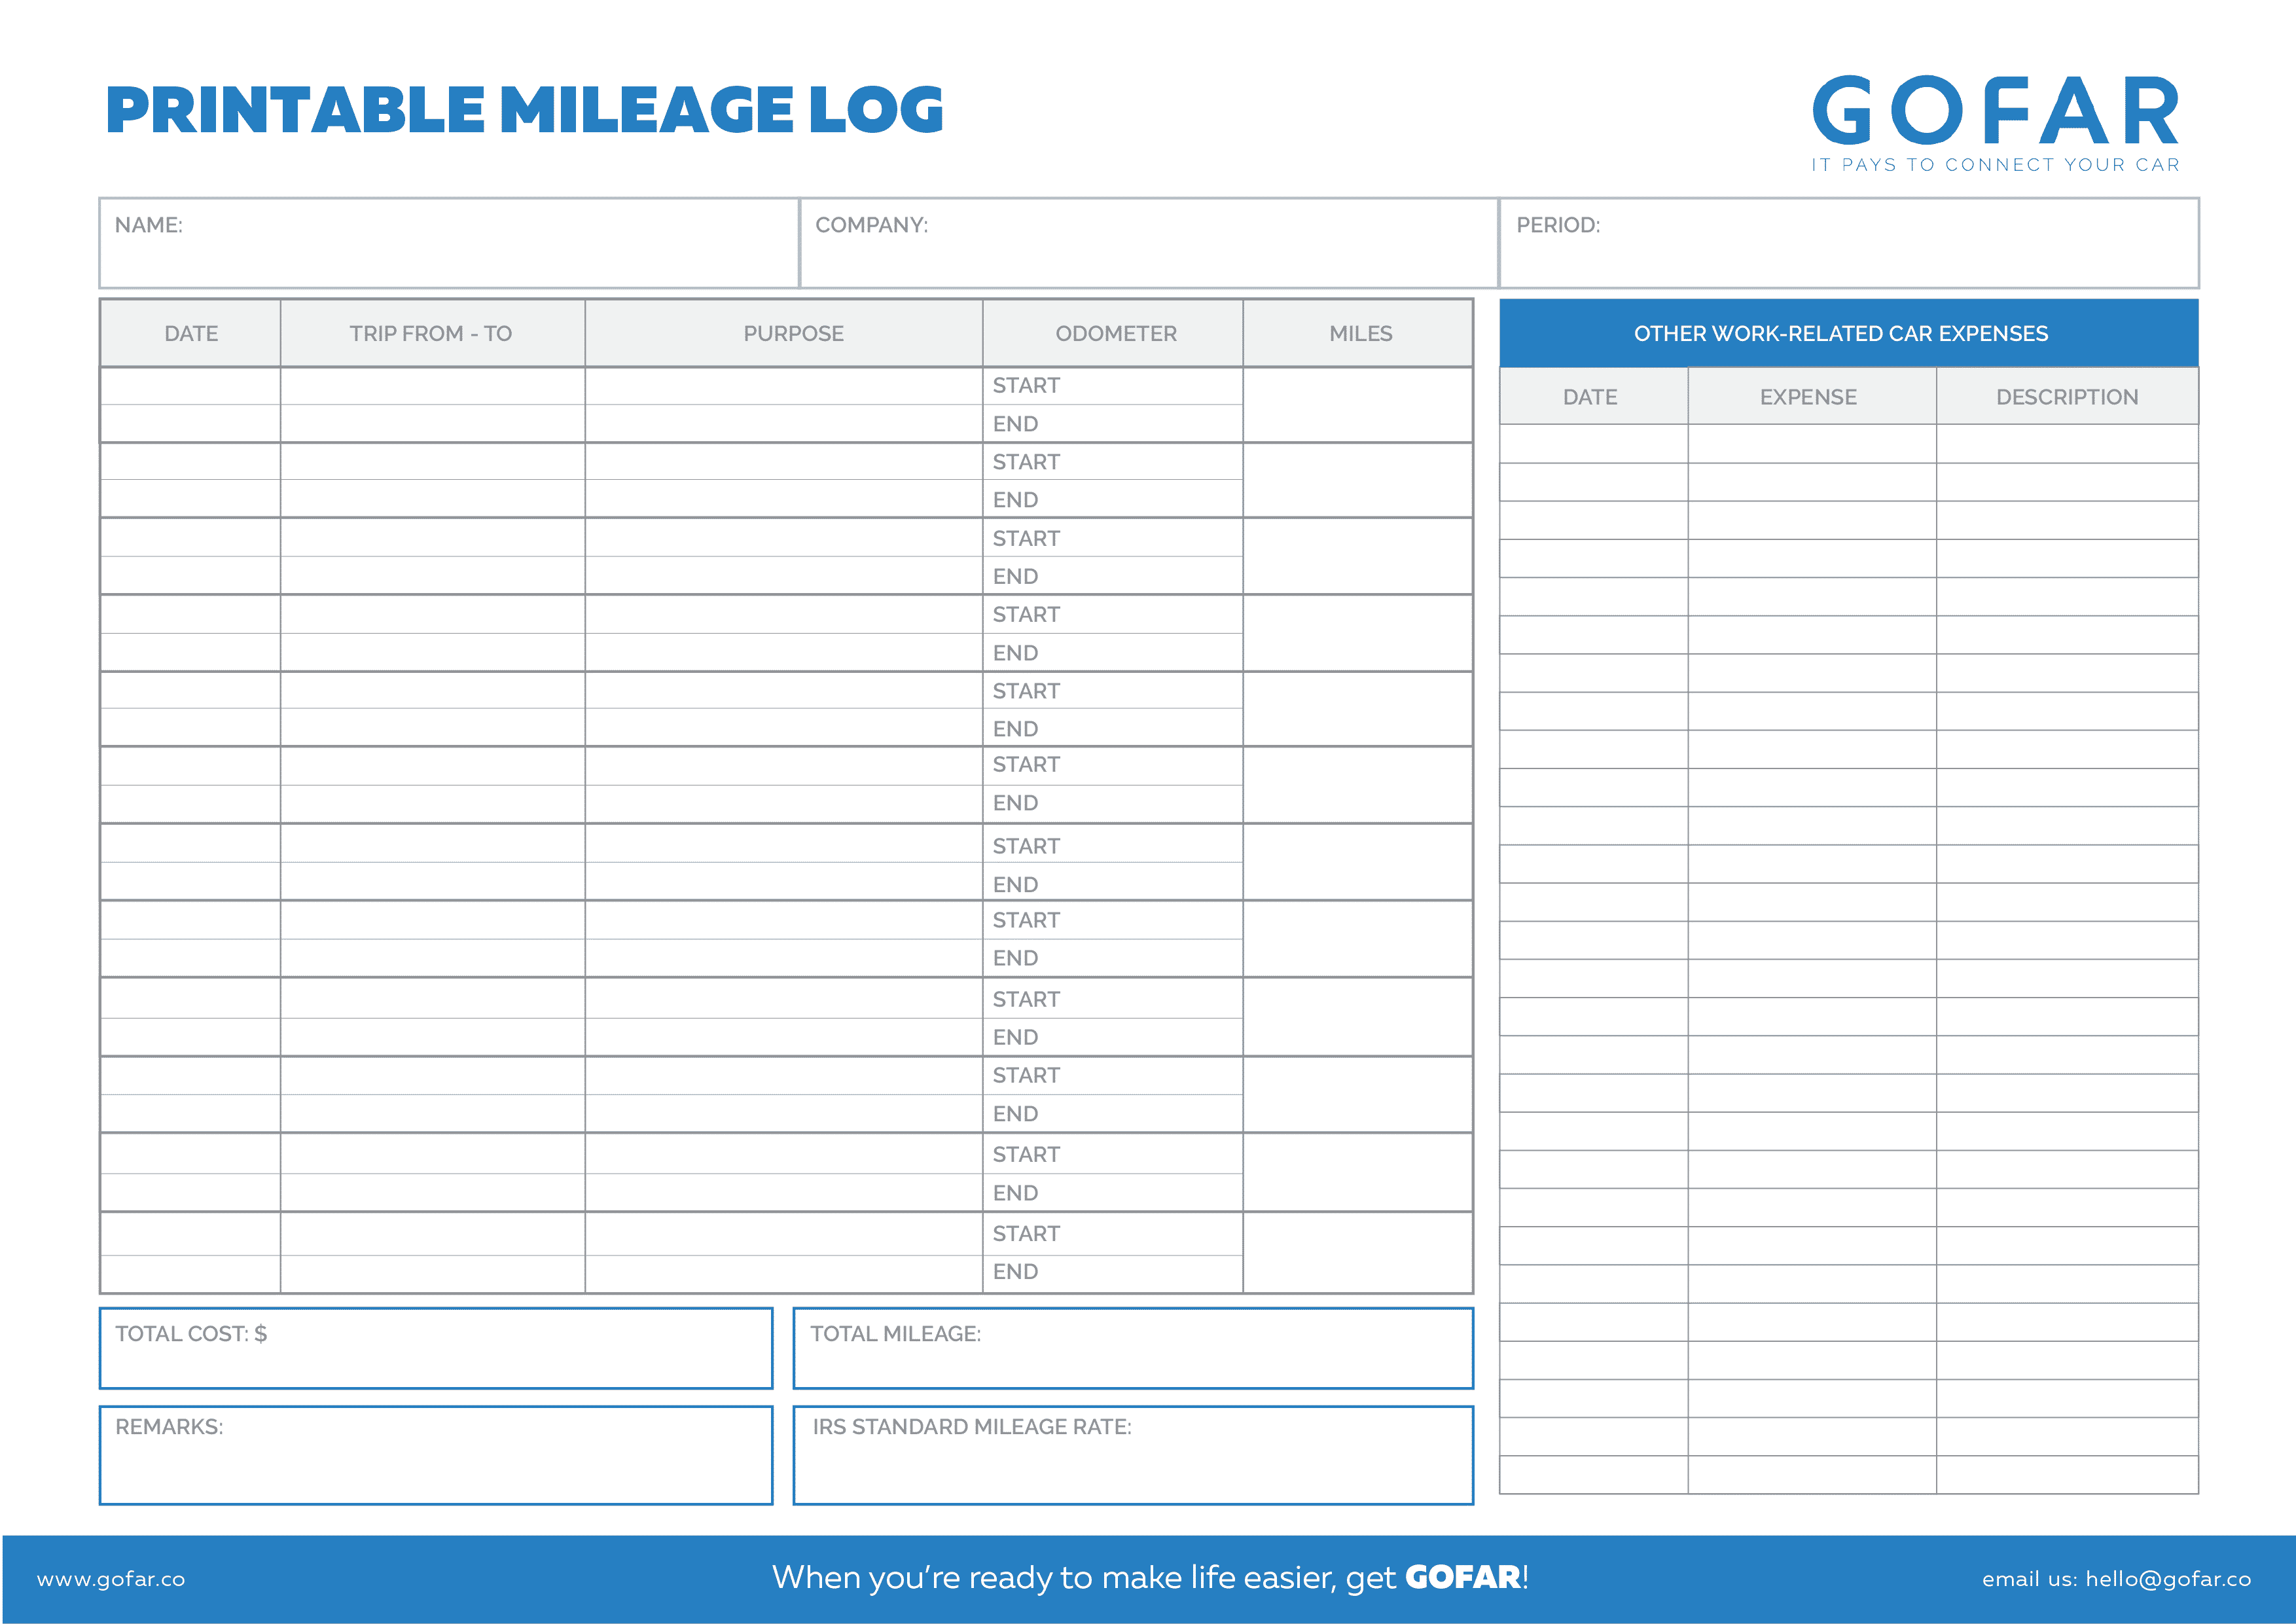 10 Printable IRS Mileage Tracking Templates - GOFAR With Gas Mileage Expense Report Template